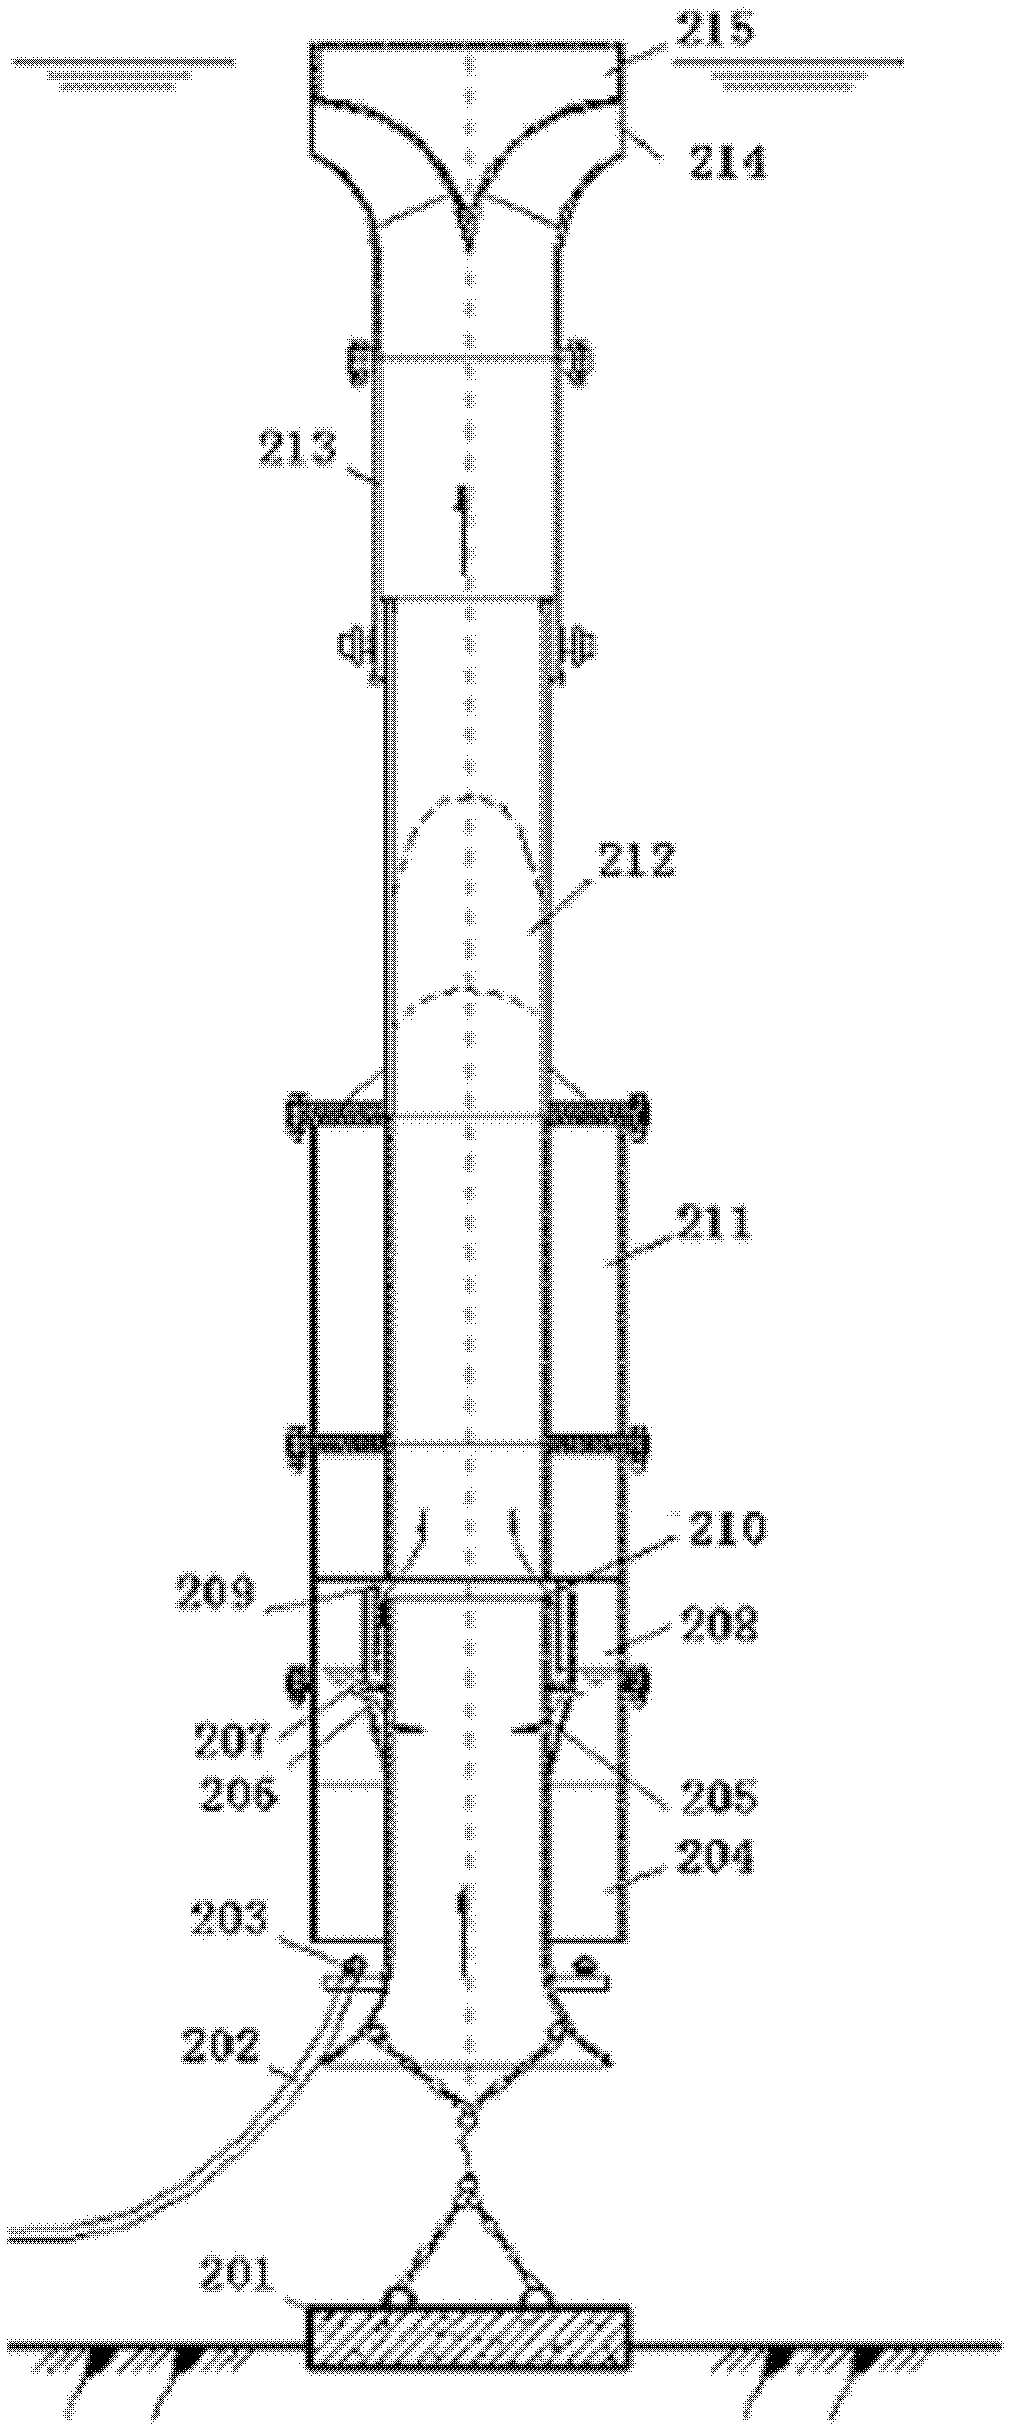 Device for improving water quality of laminated mixed oxygenated water